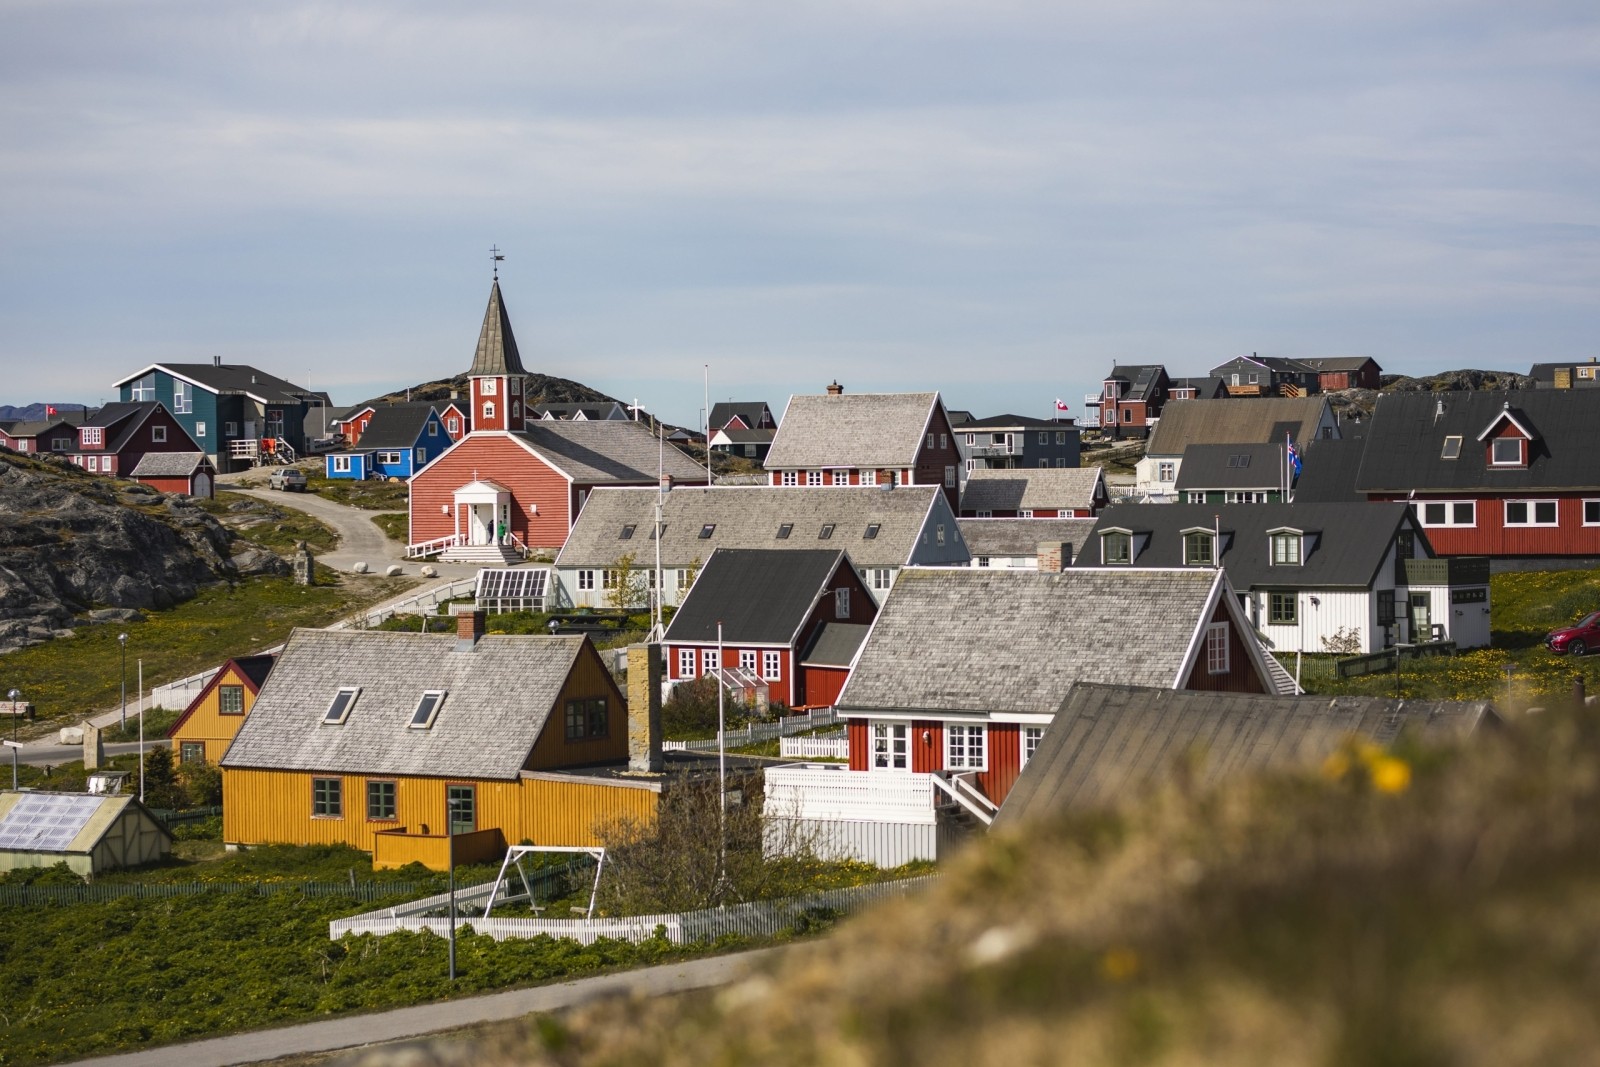 After-The Red Church and the Old Nuuk area